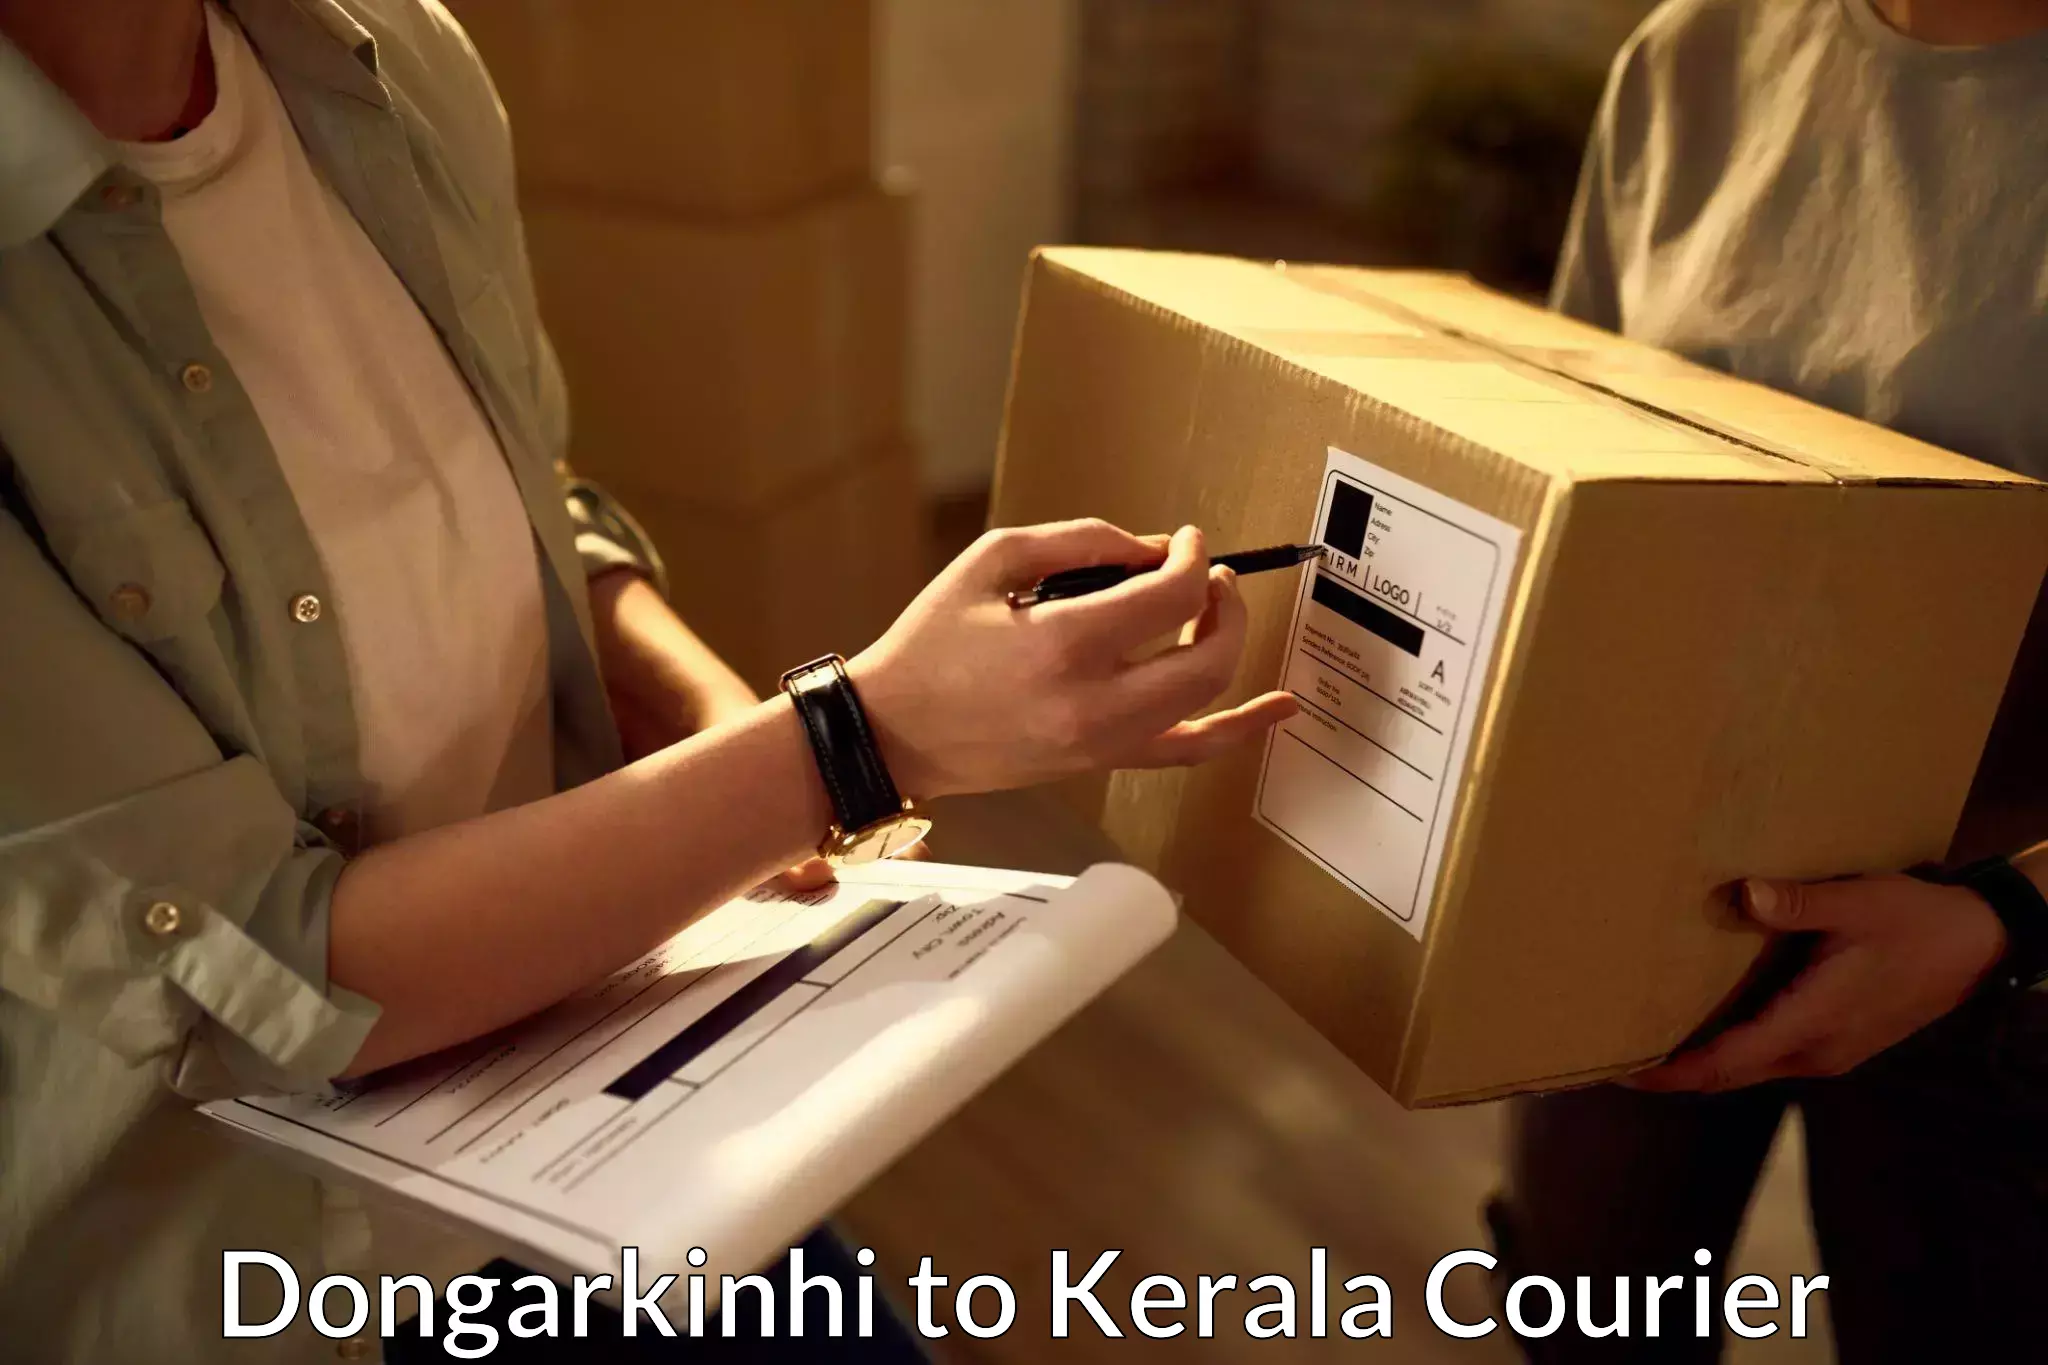 Reliable parcel services Dongarkinhi to Thamarassery